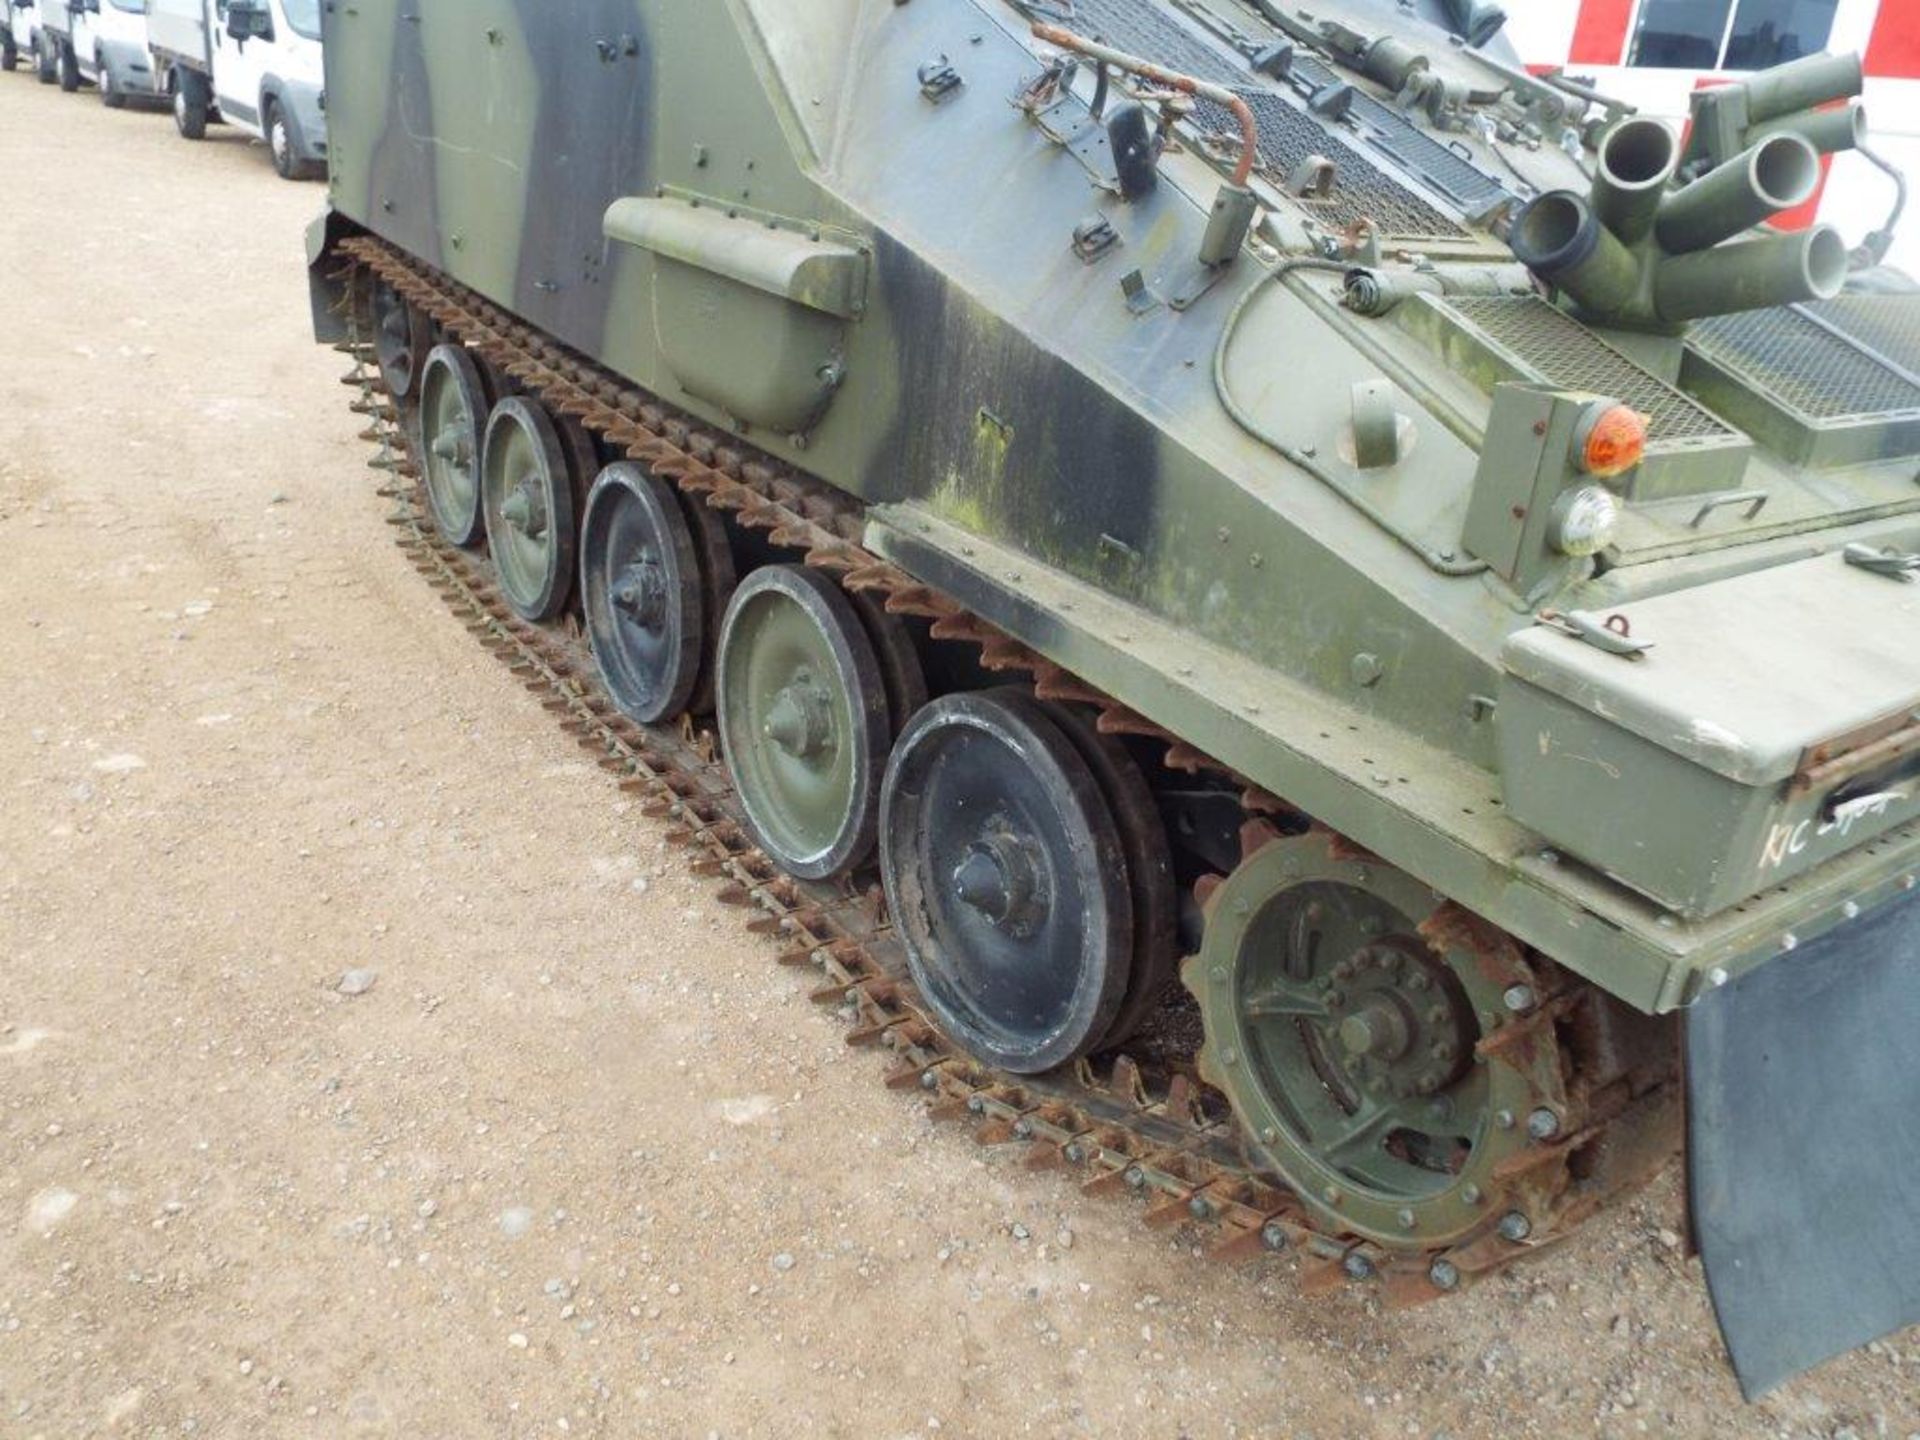 CVRT (Combat Vehicle Reconnaissance Tracked) FV105 Sultan Armoured Personnel Carrier - Image 9 of 30